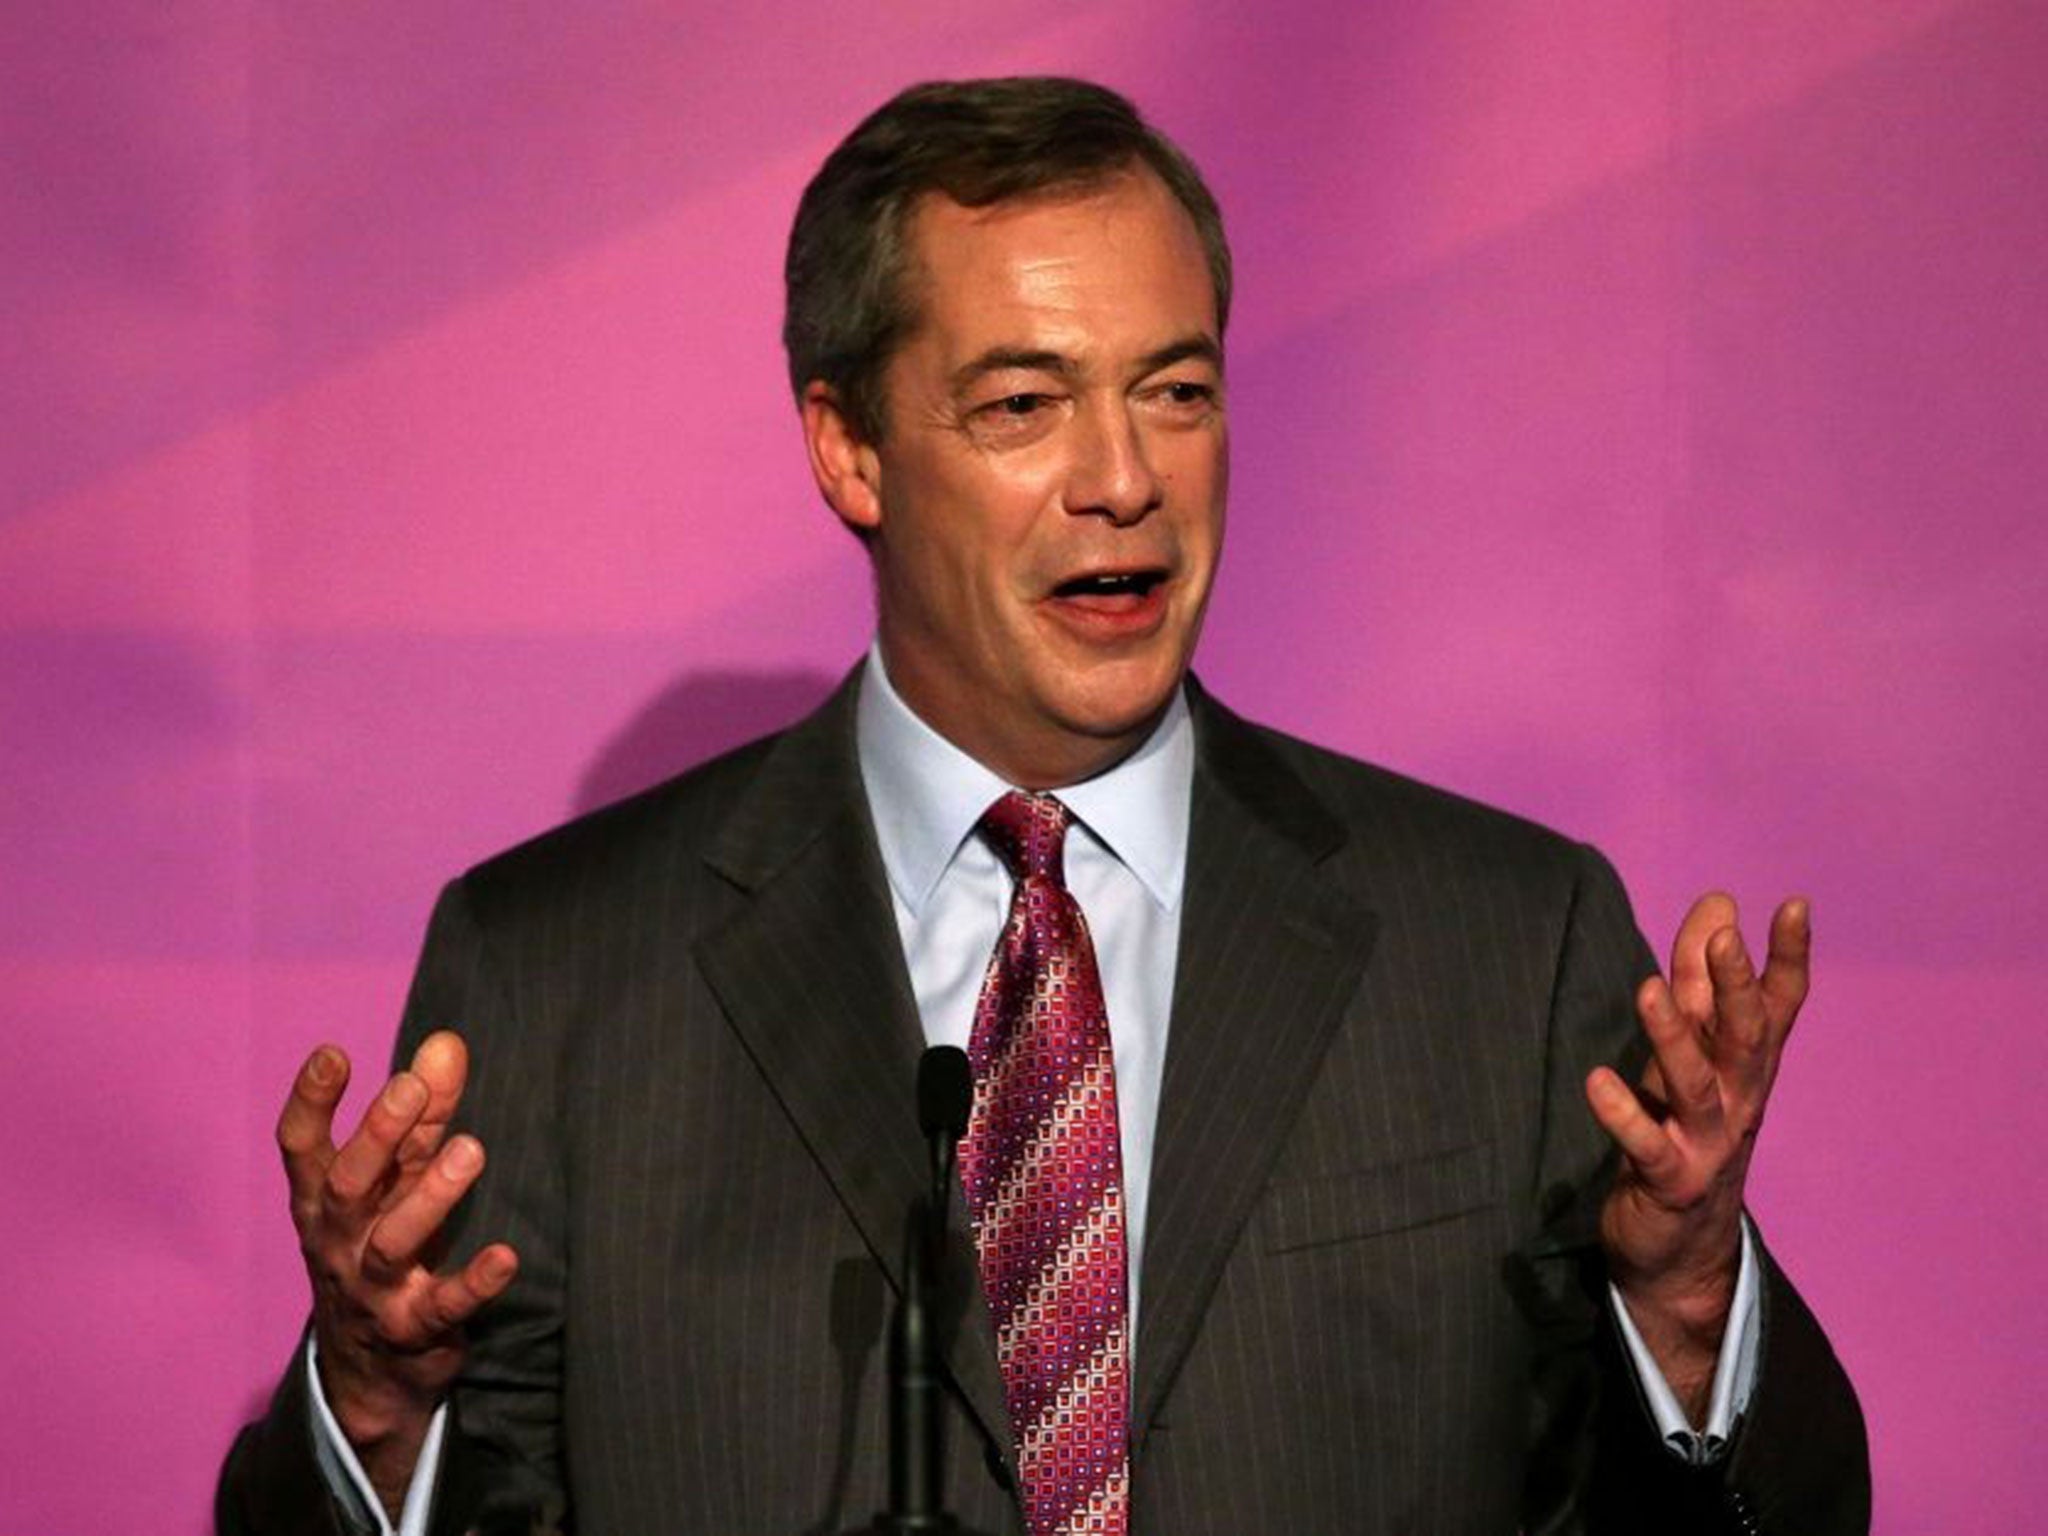 Nigel Farage speaks to supporters as he launches UKIP's General Election Campaign at the Movie Starr cinema on February 12